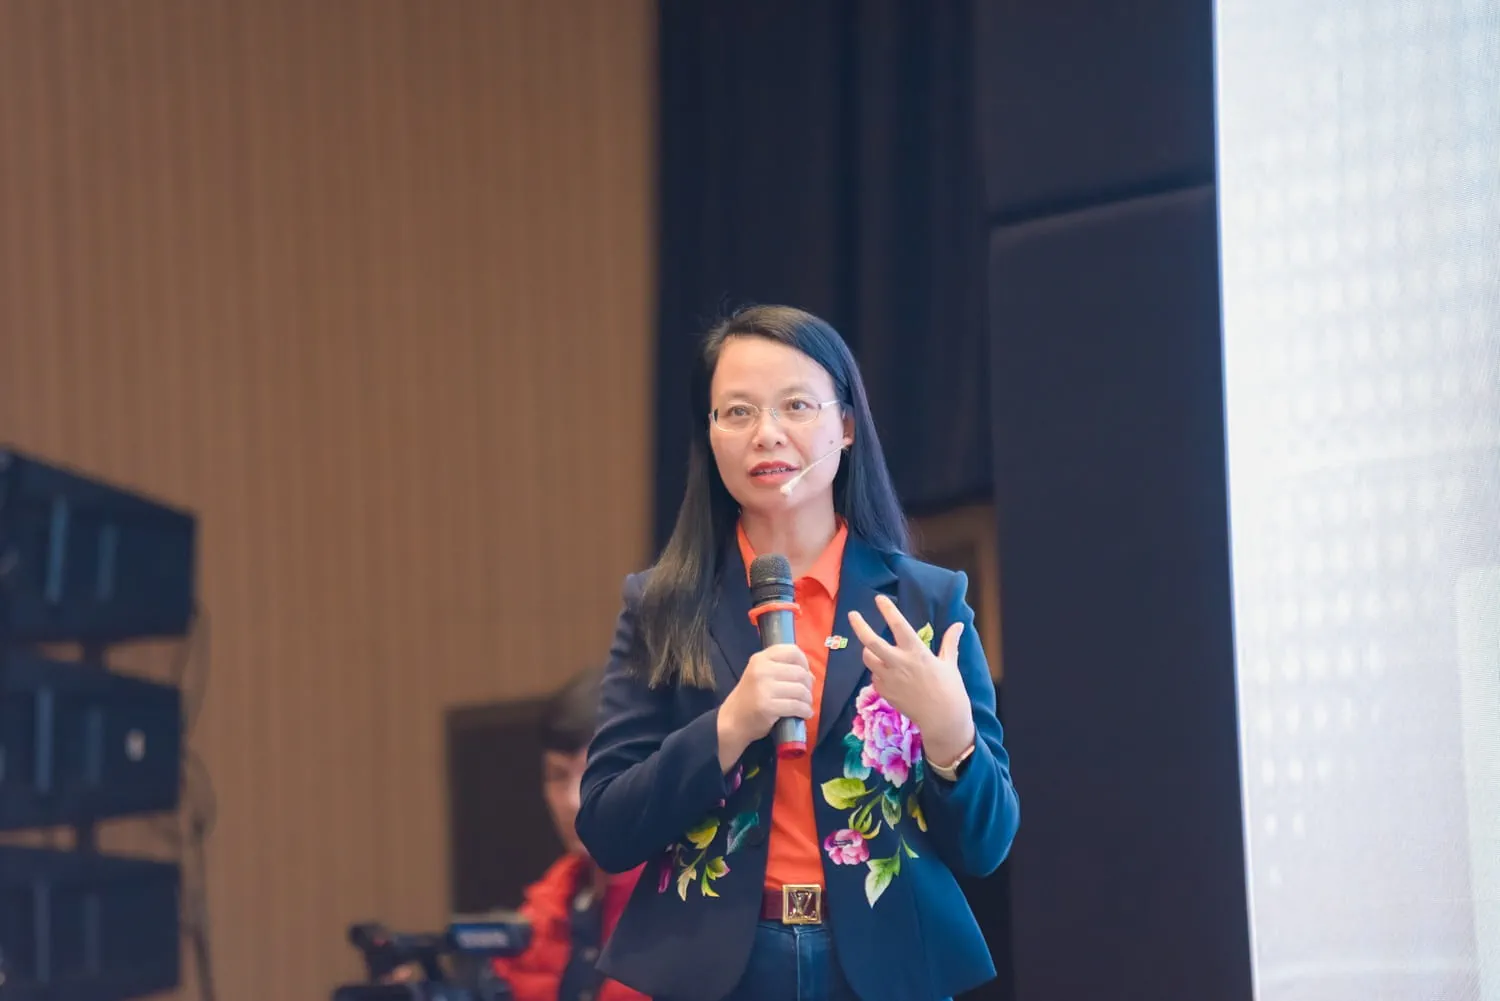 Ms. Chu Thi Thanh Ha, Chairperson of FPT Software, said, "The essence of world-class companies lies in the caliber of their people."